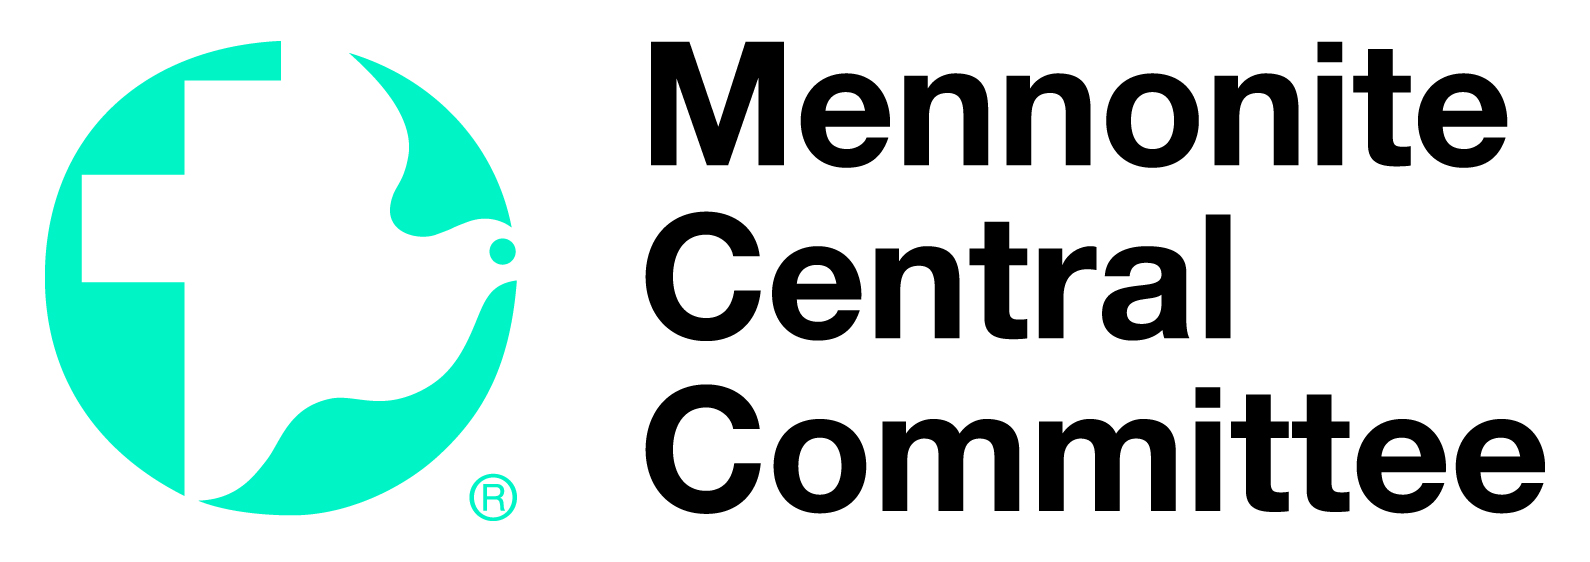 Mennonite Central Committee